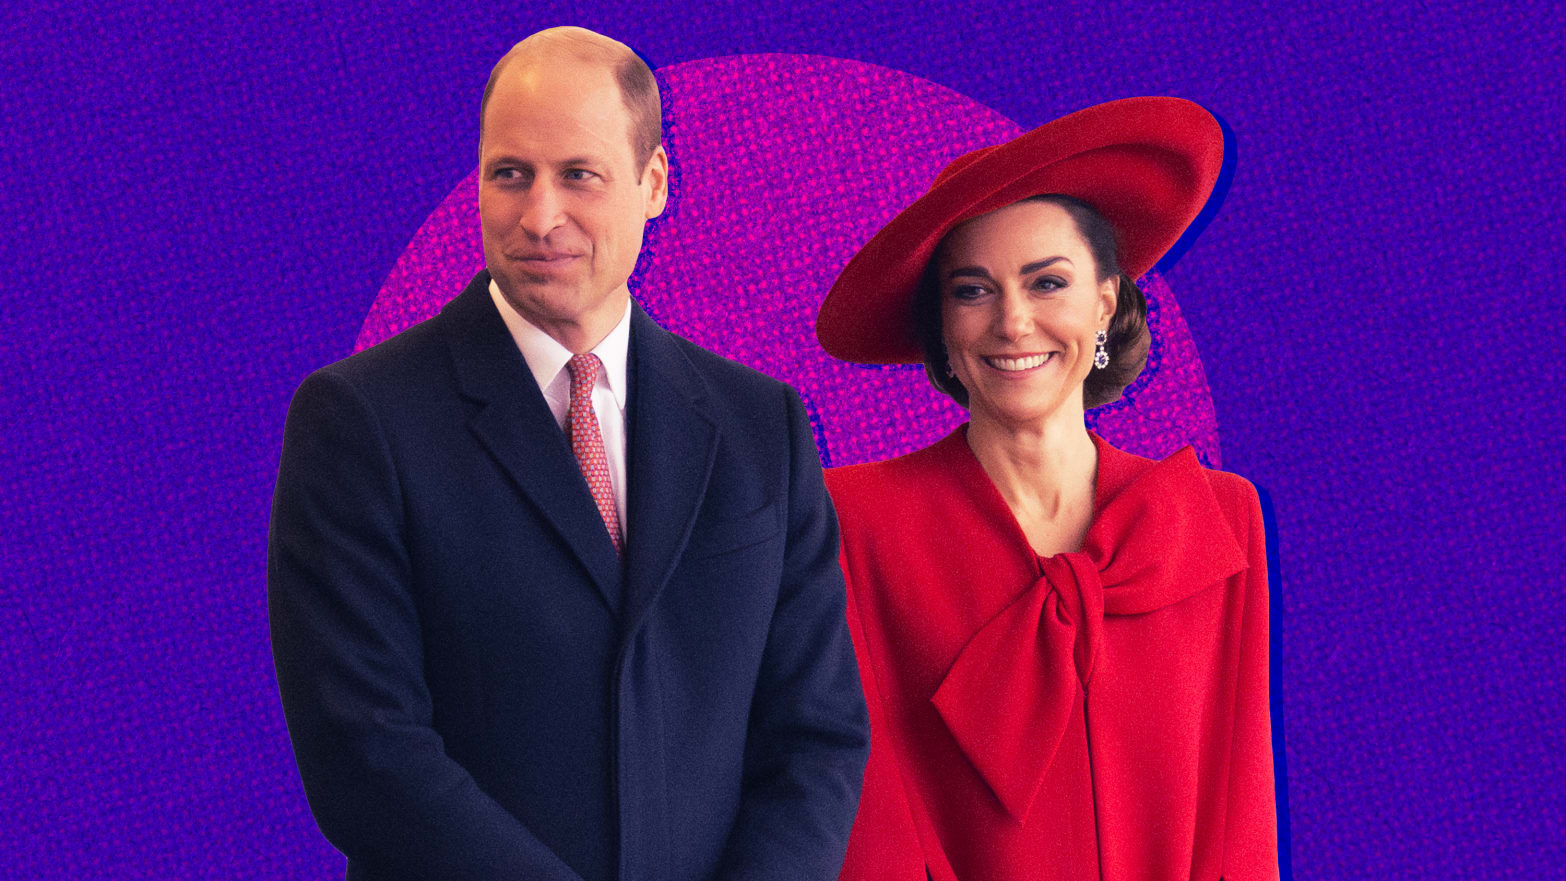 A photo illustration of Prince William and Princess Kate.